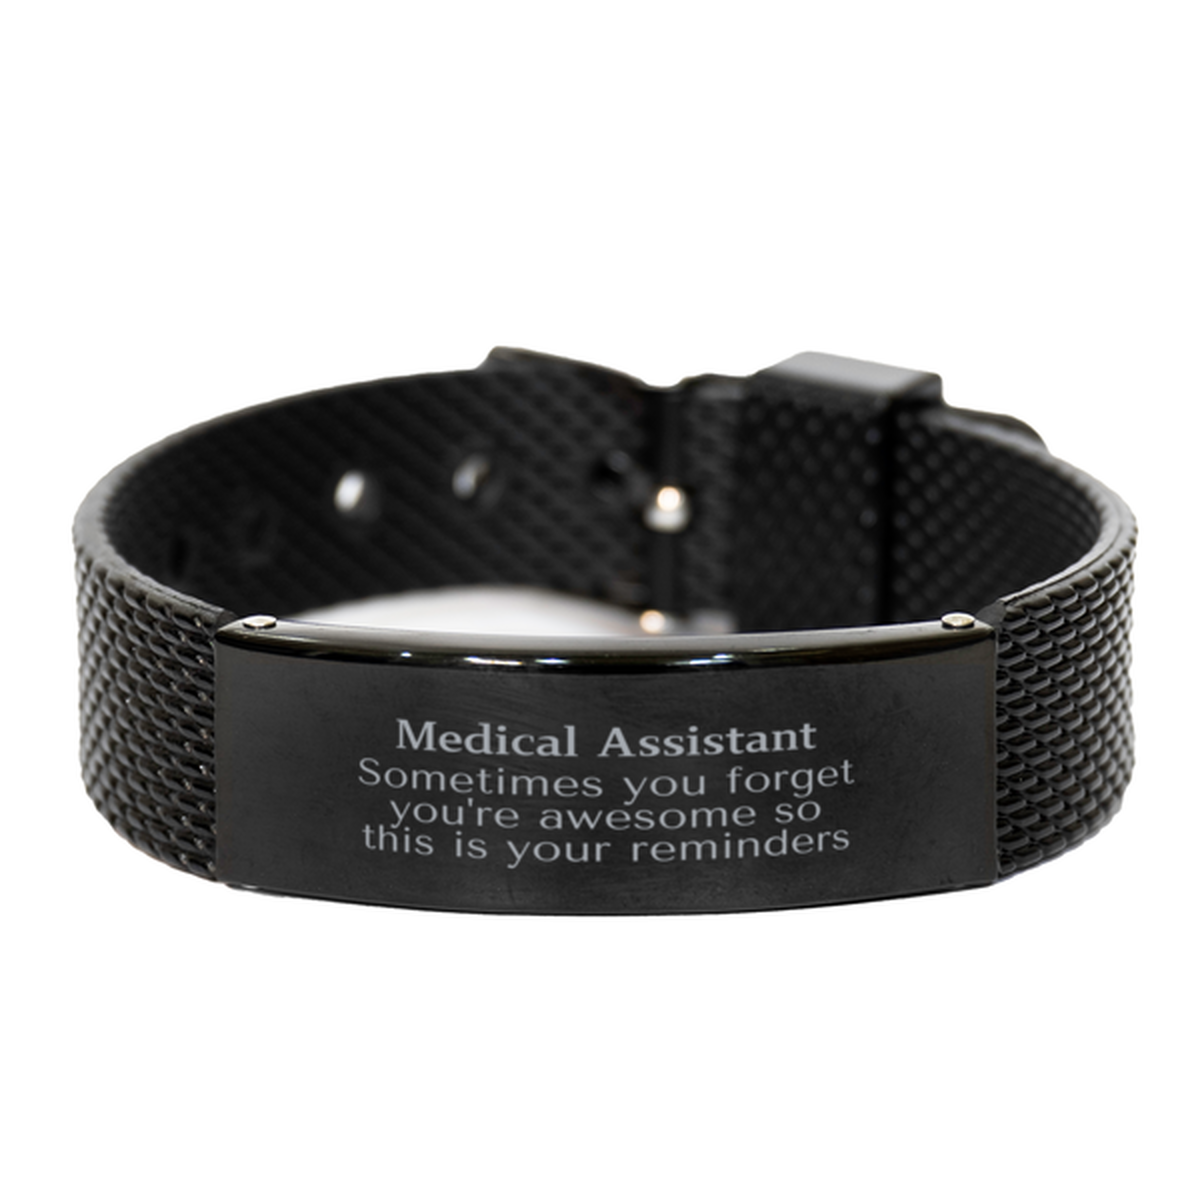 Sentimental Medical Assistant Black Shark Mesh Bracelet, Medical Assistant Sometimes you forget you're awesome so this is your reminders, Graduation Christmas Birthday Gifts for Medical Assistant, Men, Women, Coworkers